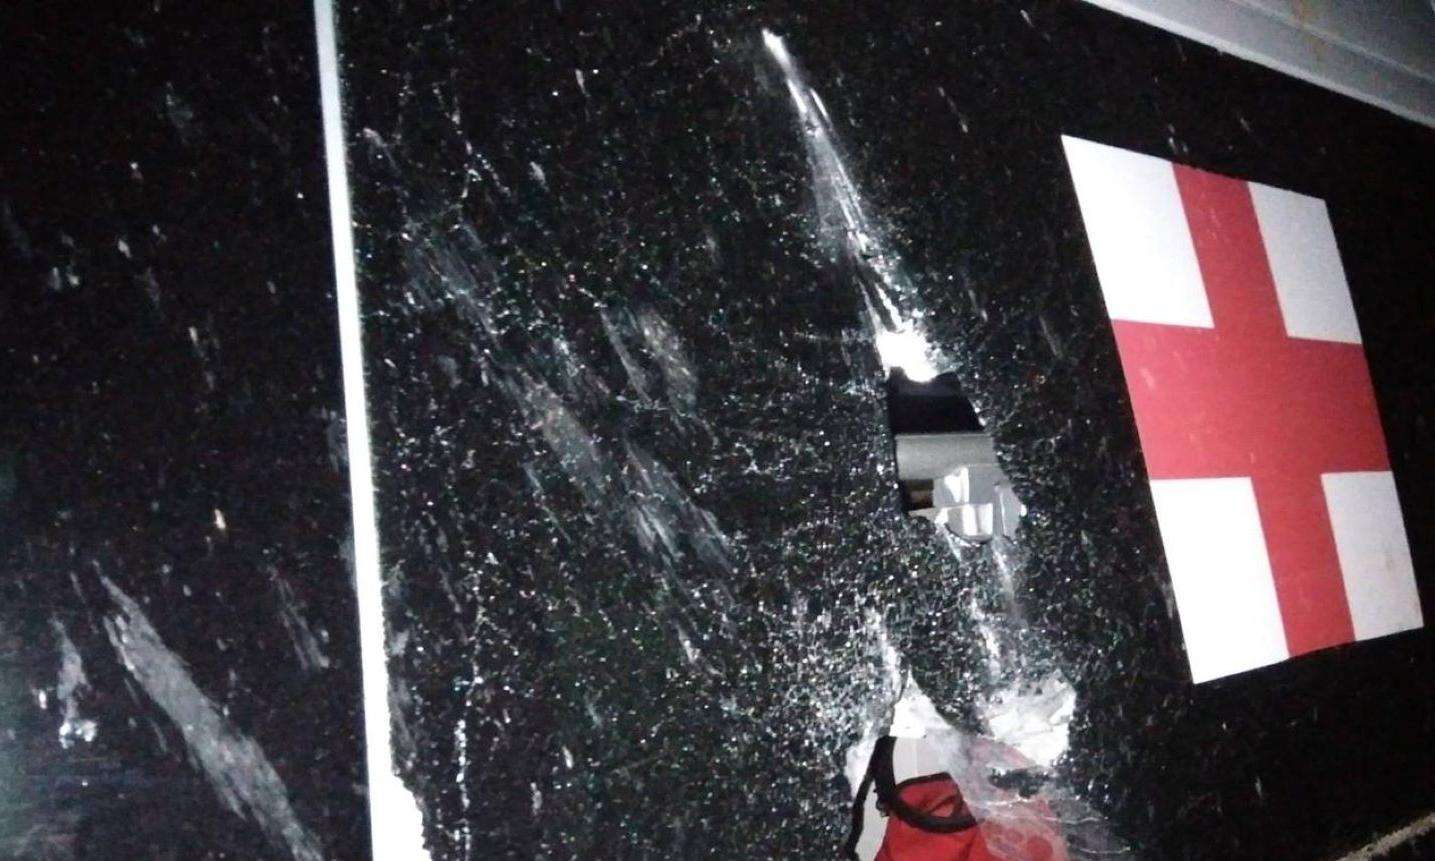 The partially shattered glass window of an MSF ambulance in Selydove.